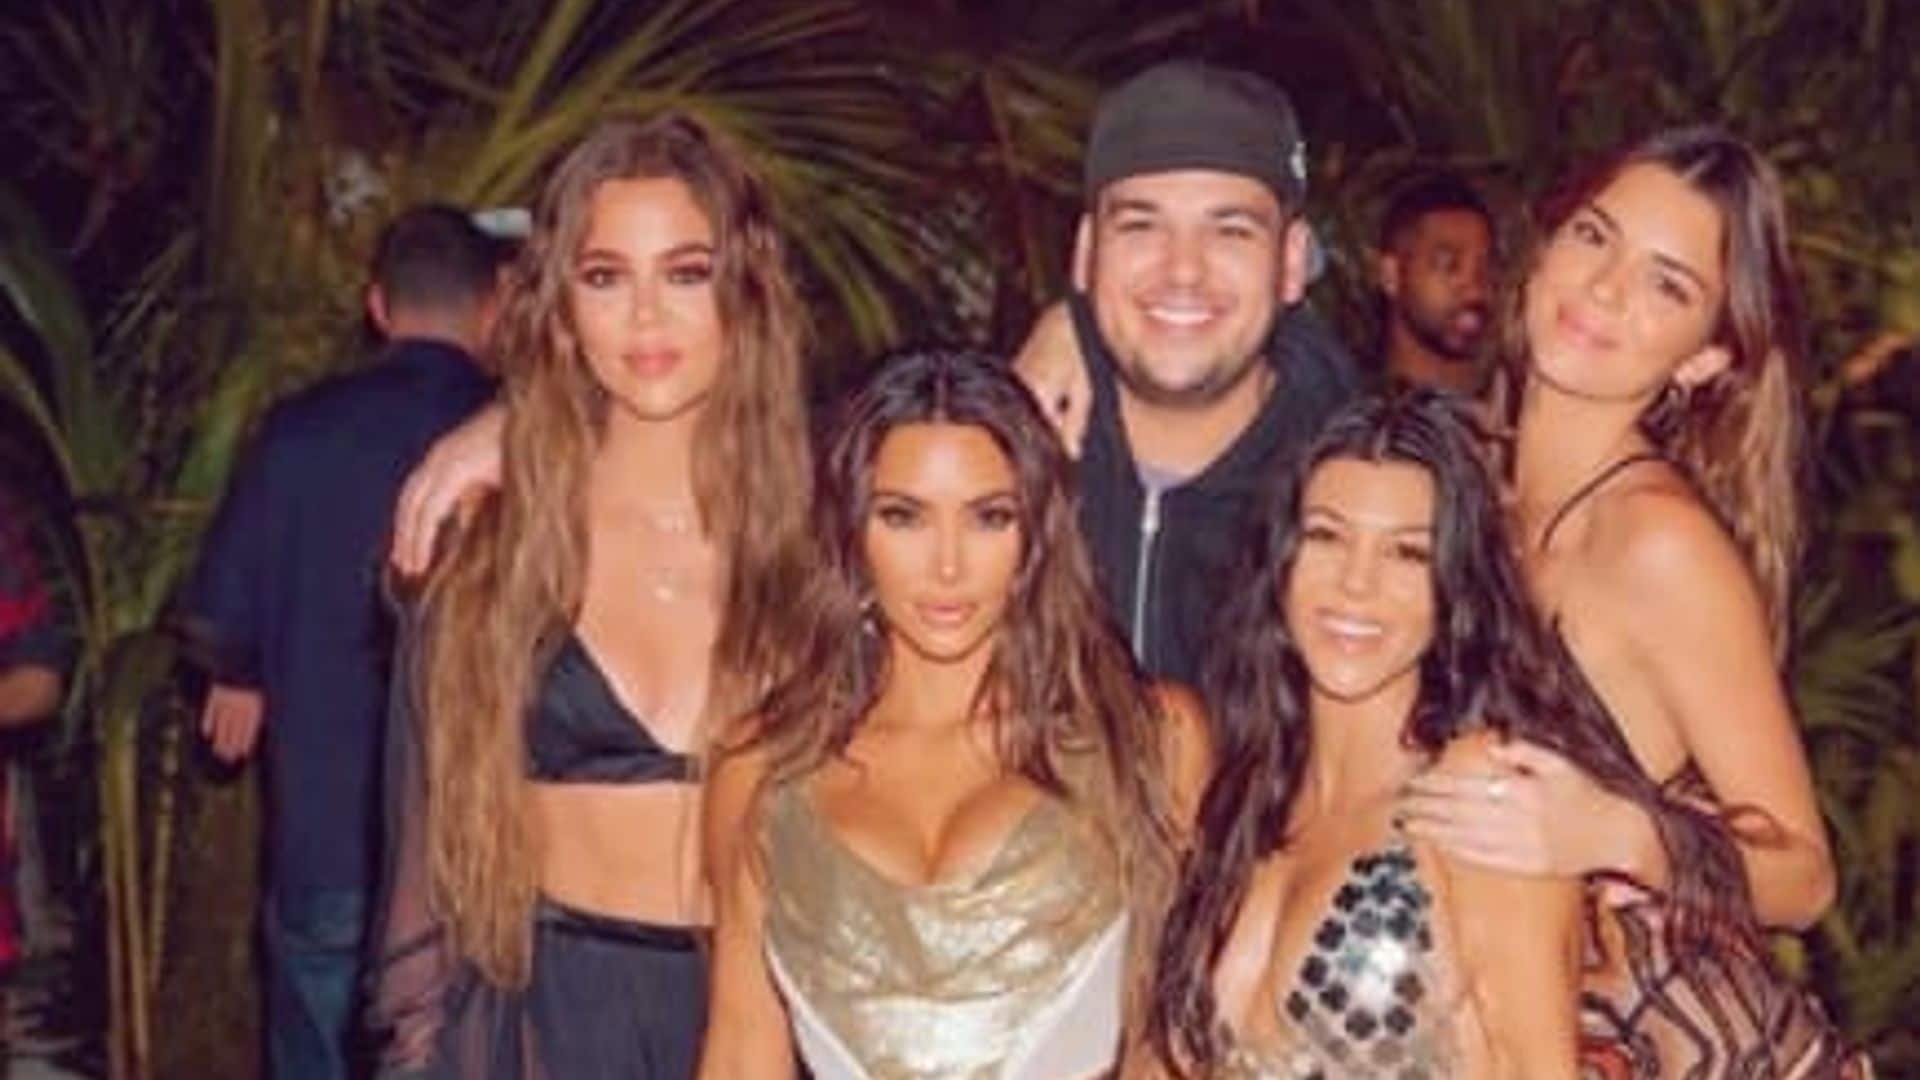 Kim Kardashian West is receiving backlash for her 40th birthday party